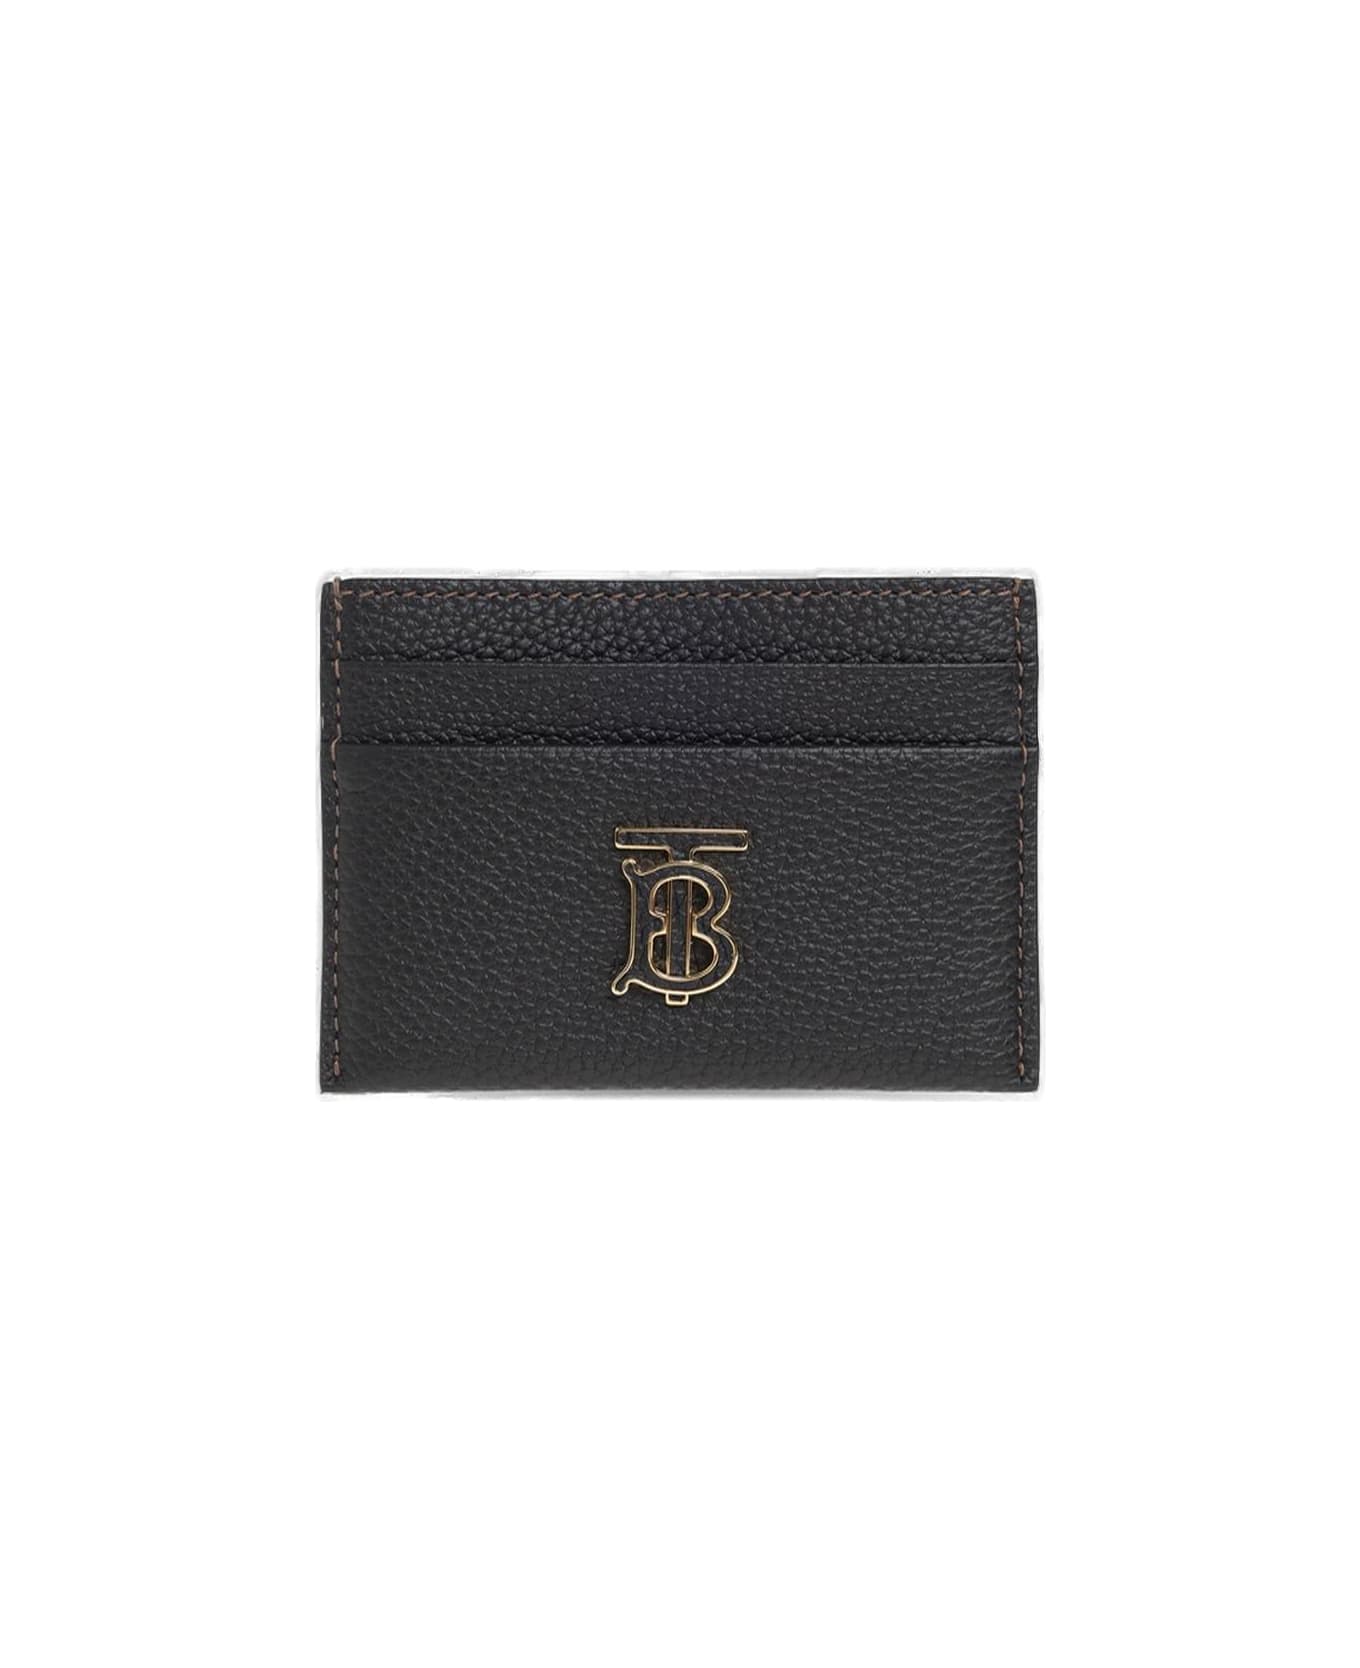 Burberry - Credit card holder for Woman - Black - 8062351-A1189